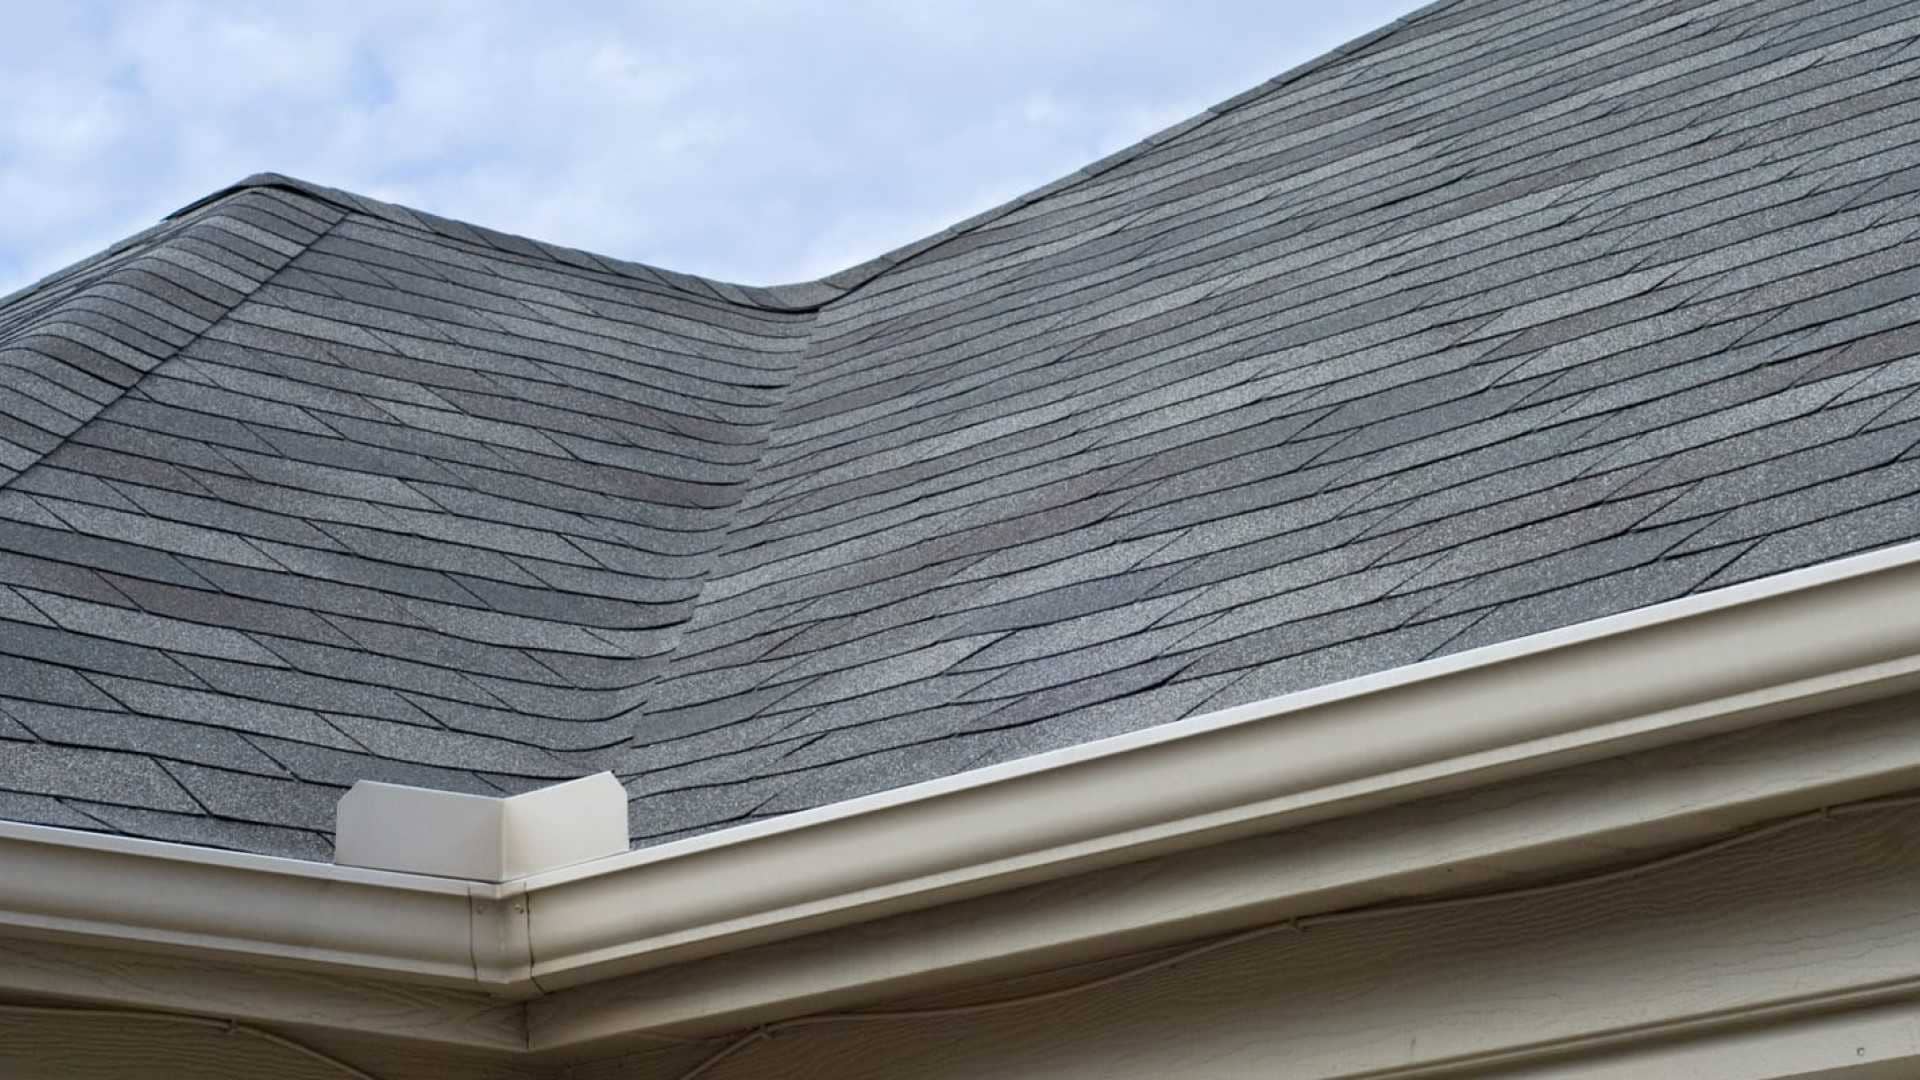 Asphalt shingle roof with new gutters installed